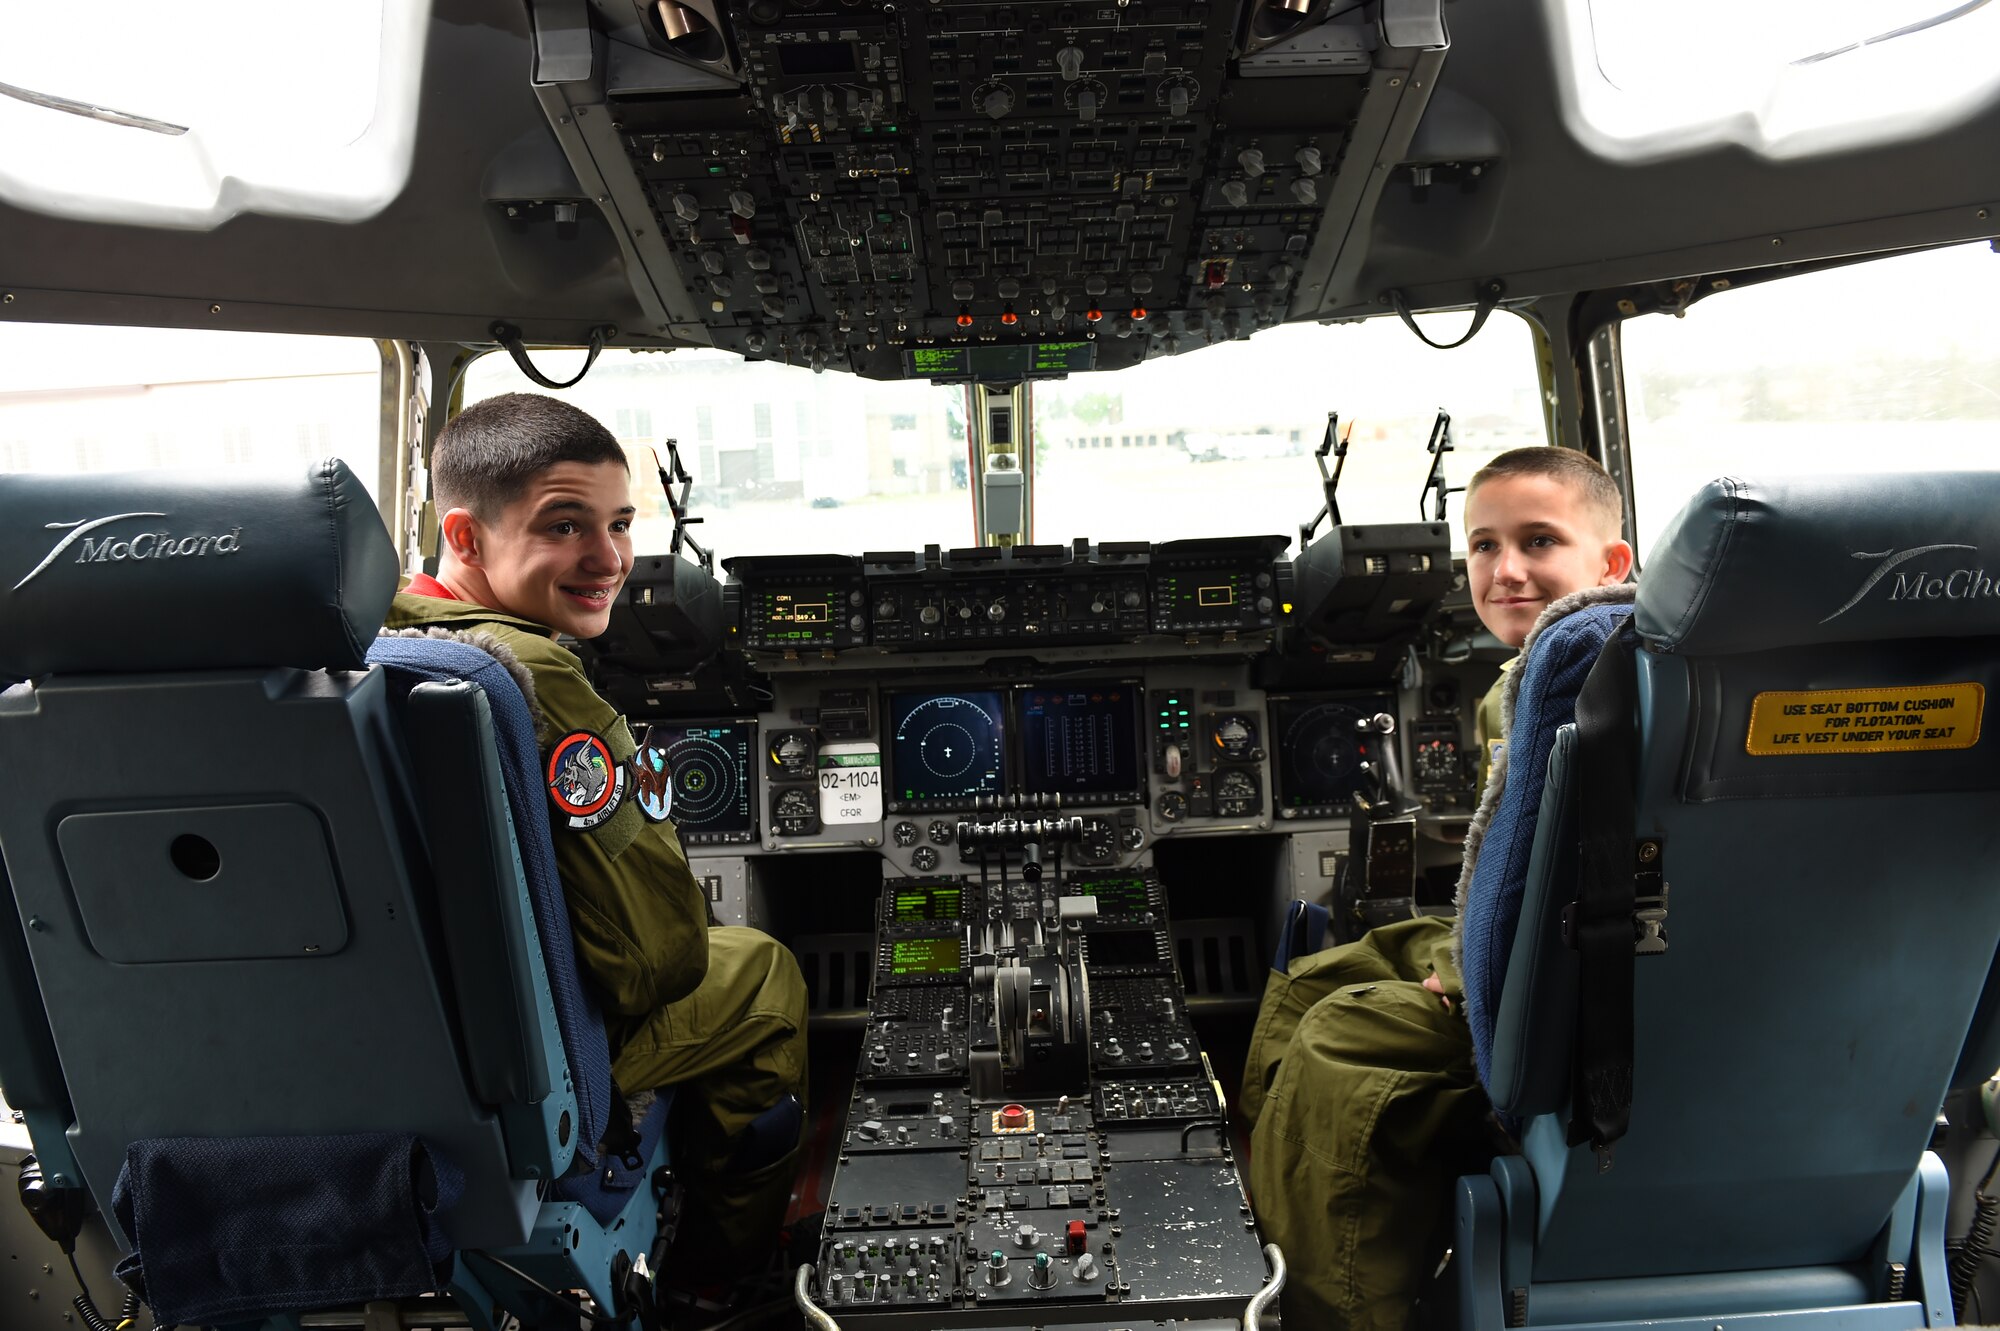 Daniel Duffy (left) and Nicholas Duffy (right) sit in the cock pit of a C-17 Globemaster III at Joint Base Lewis-McChord, Wash., May 26, 2016. The brothers are the newest Pilots for a Day here at McChord and were welcomed as honorary members of the 4th Airlift Squadron. (U.S. Air Force photo/Staff Sgt. Naomi Shipley)